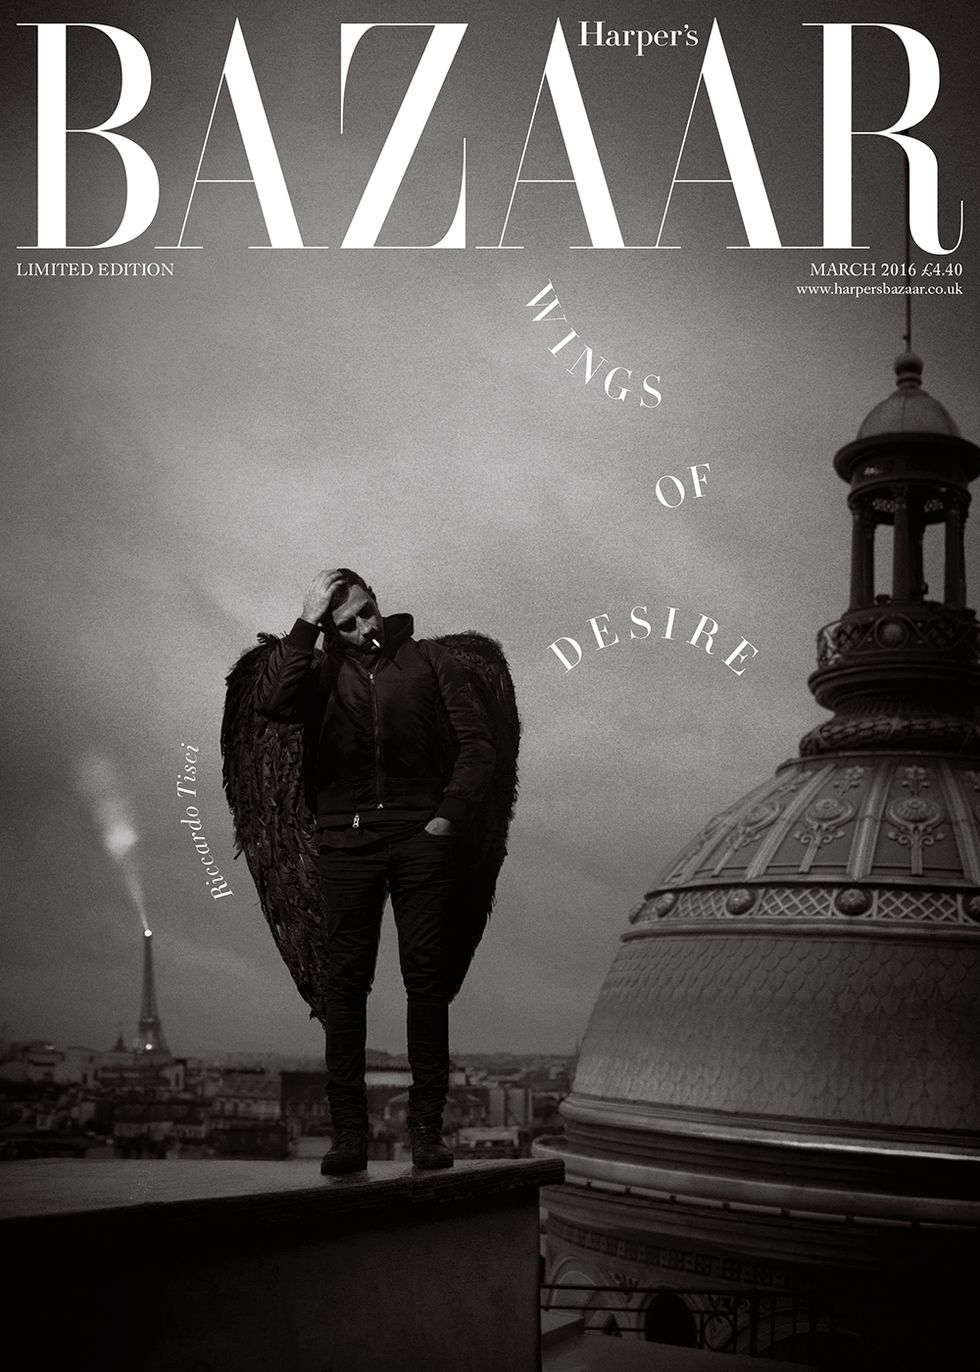 Riccardo Tisci for Givenchy on the Harper's Bazaar March issue limited-edition cover